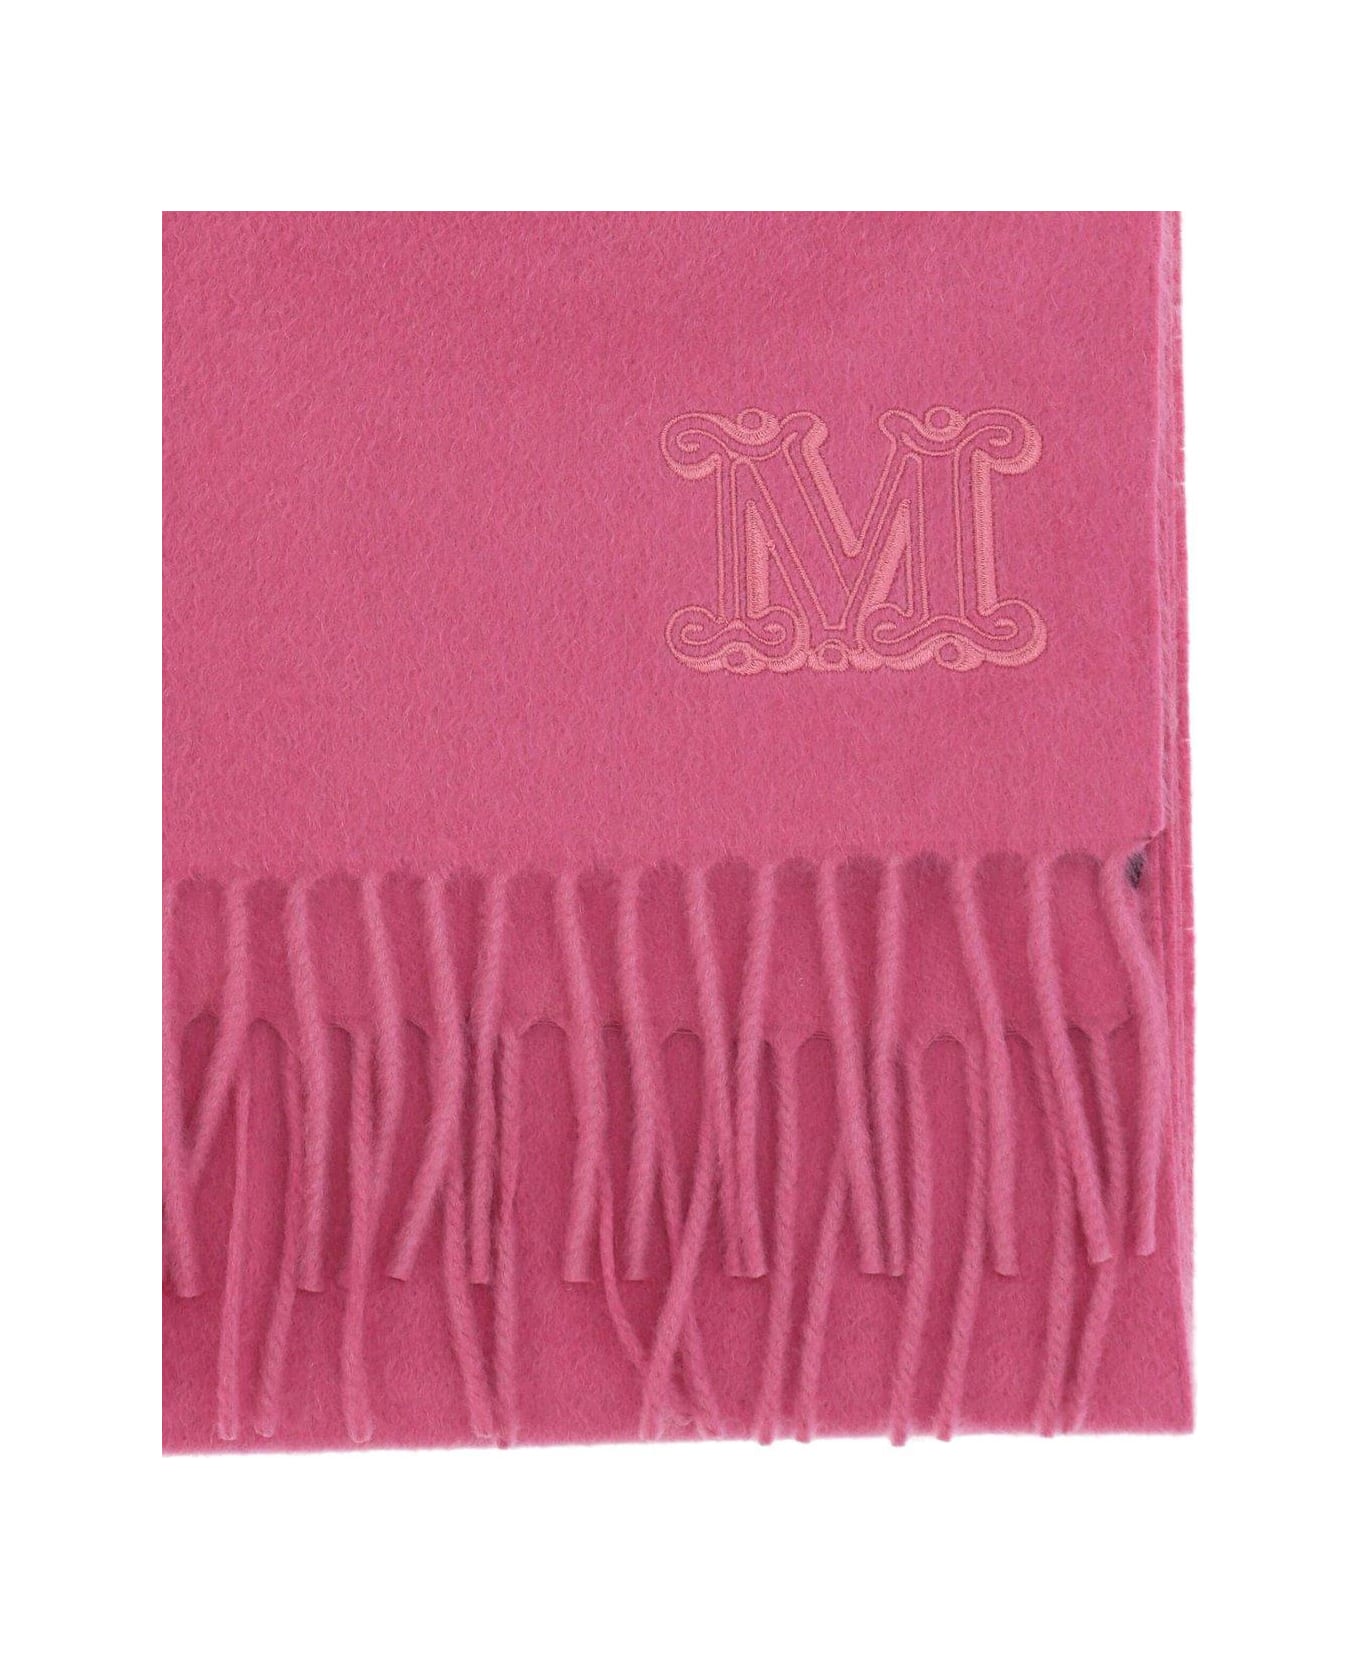 Max Mara Logo Embroidered Fringed Knitted Scarf - Antique Rose